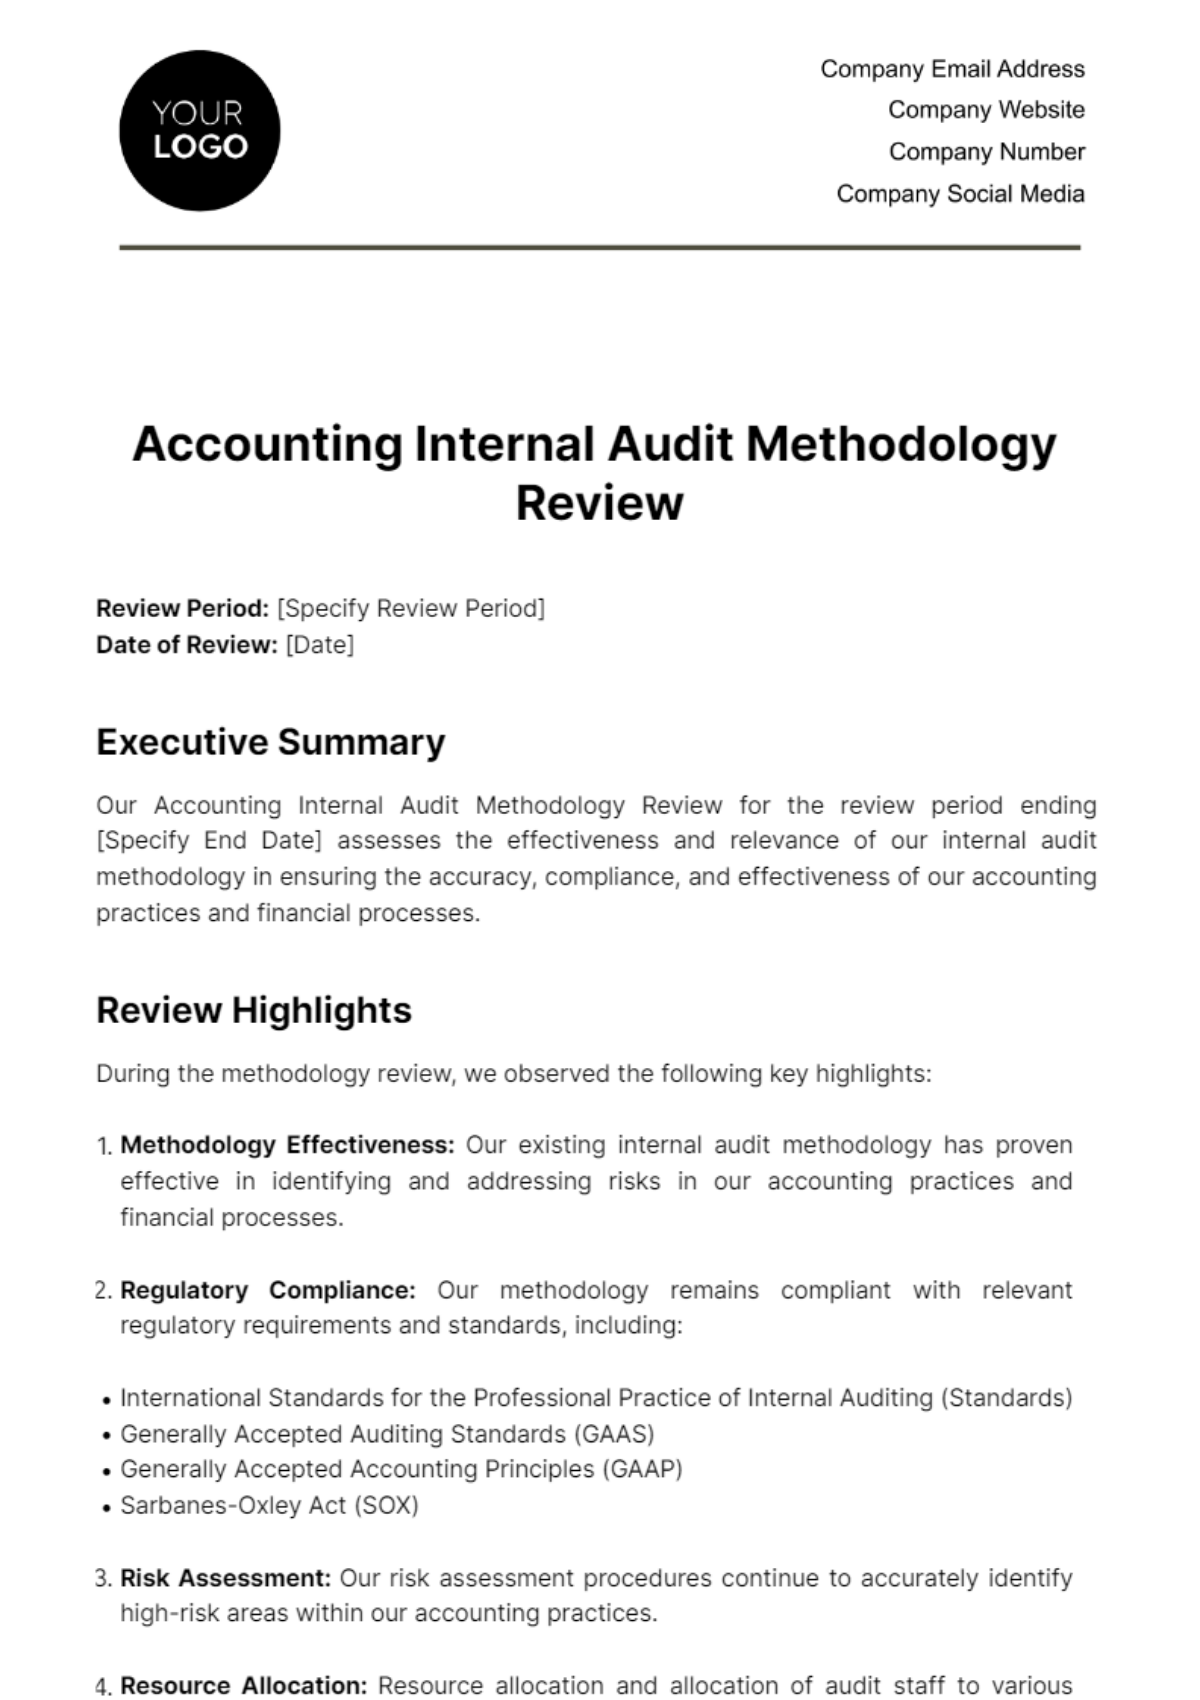 Free Accounting Internal Audit Methodology Review Template